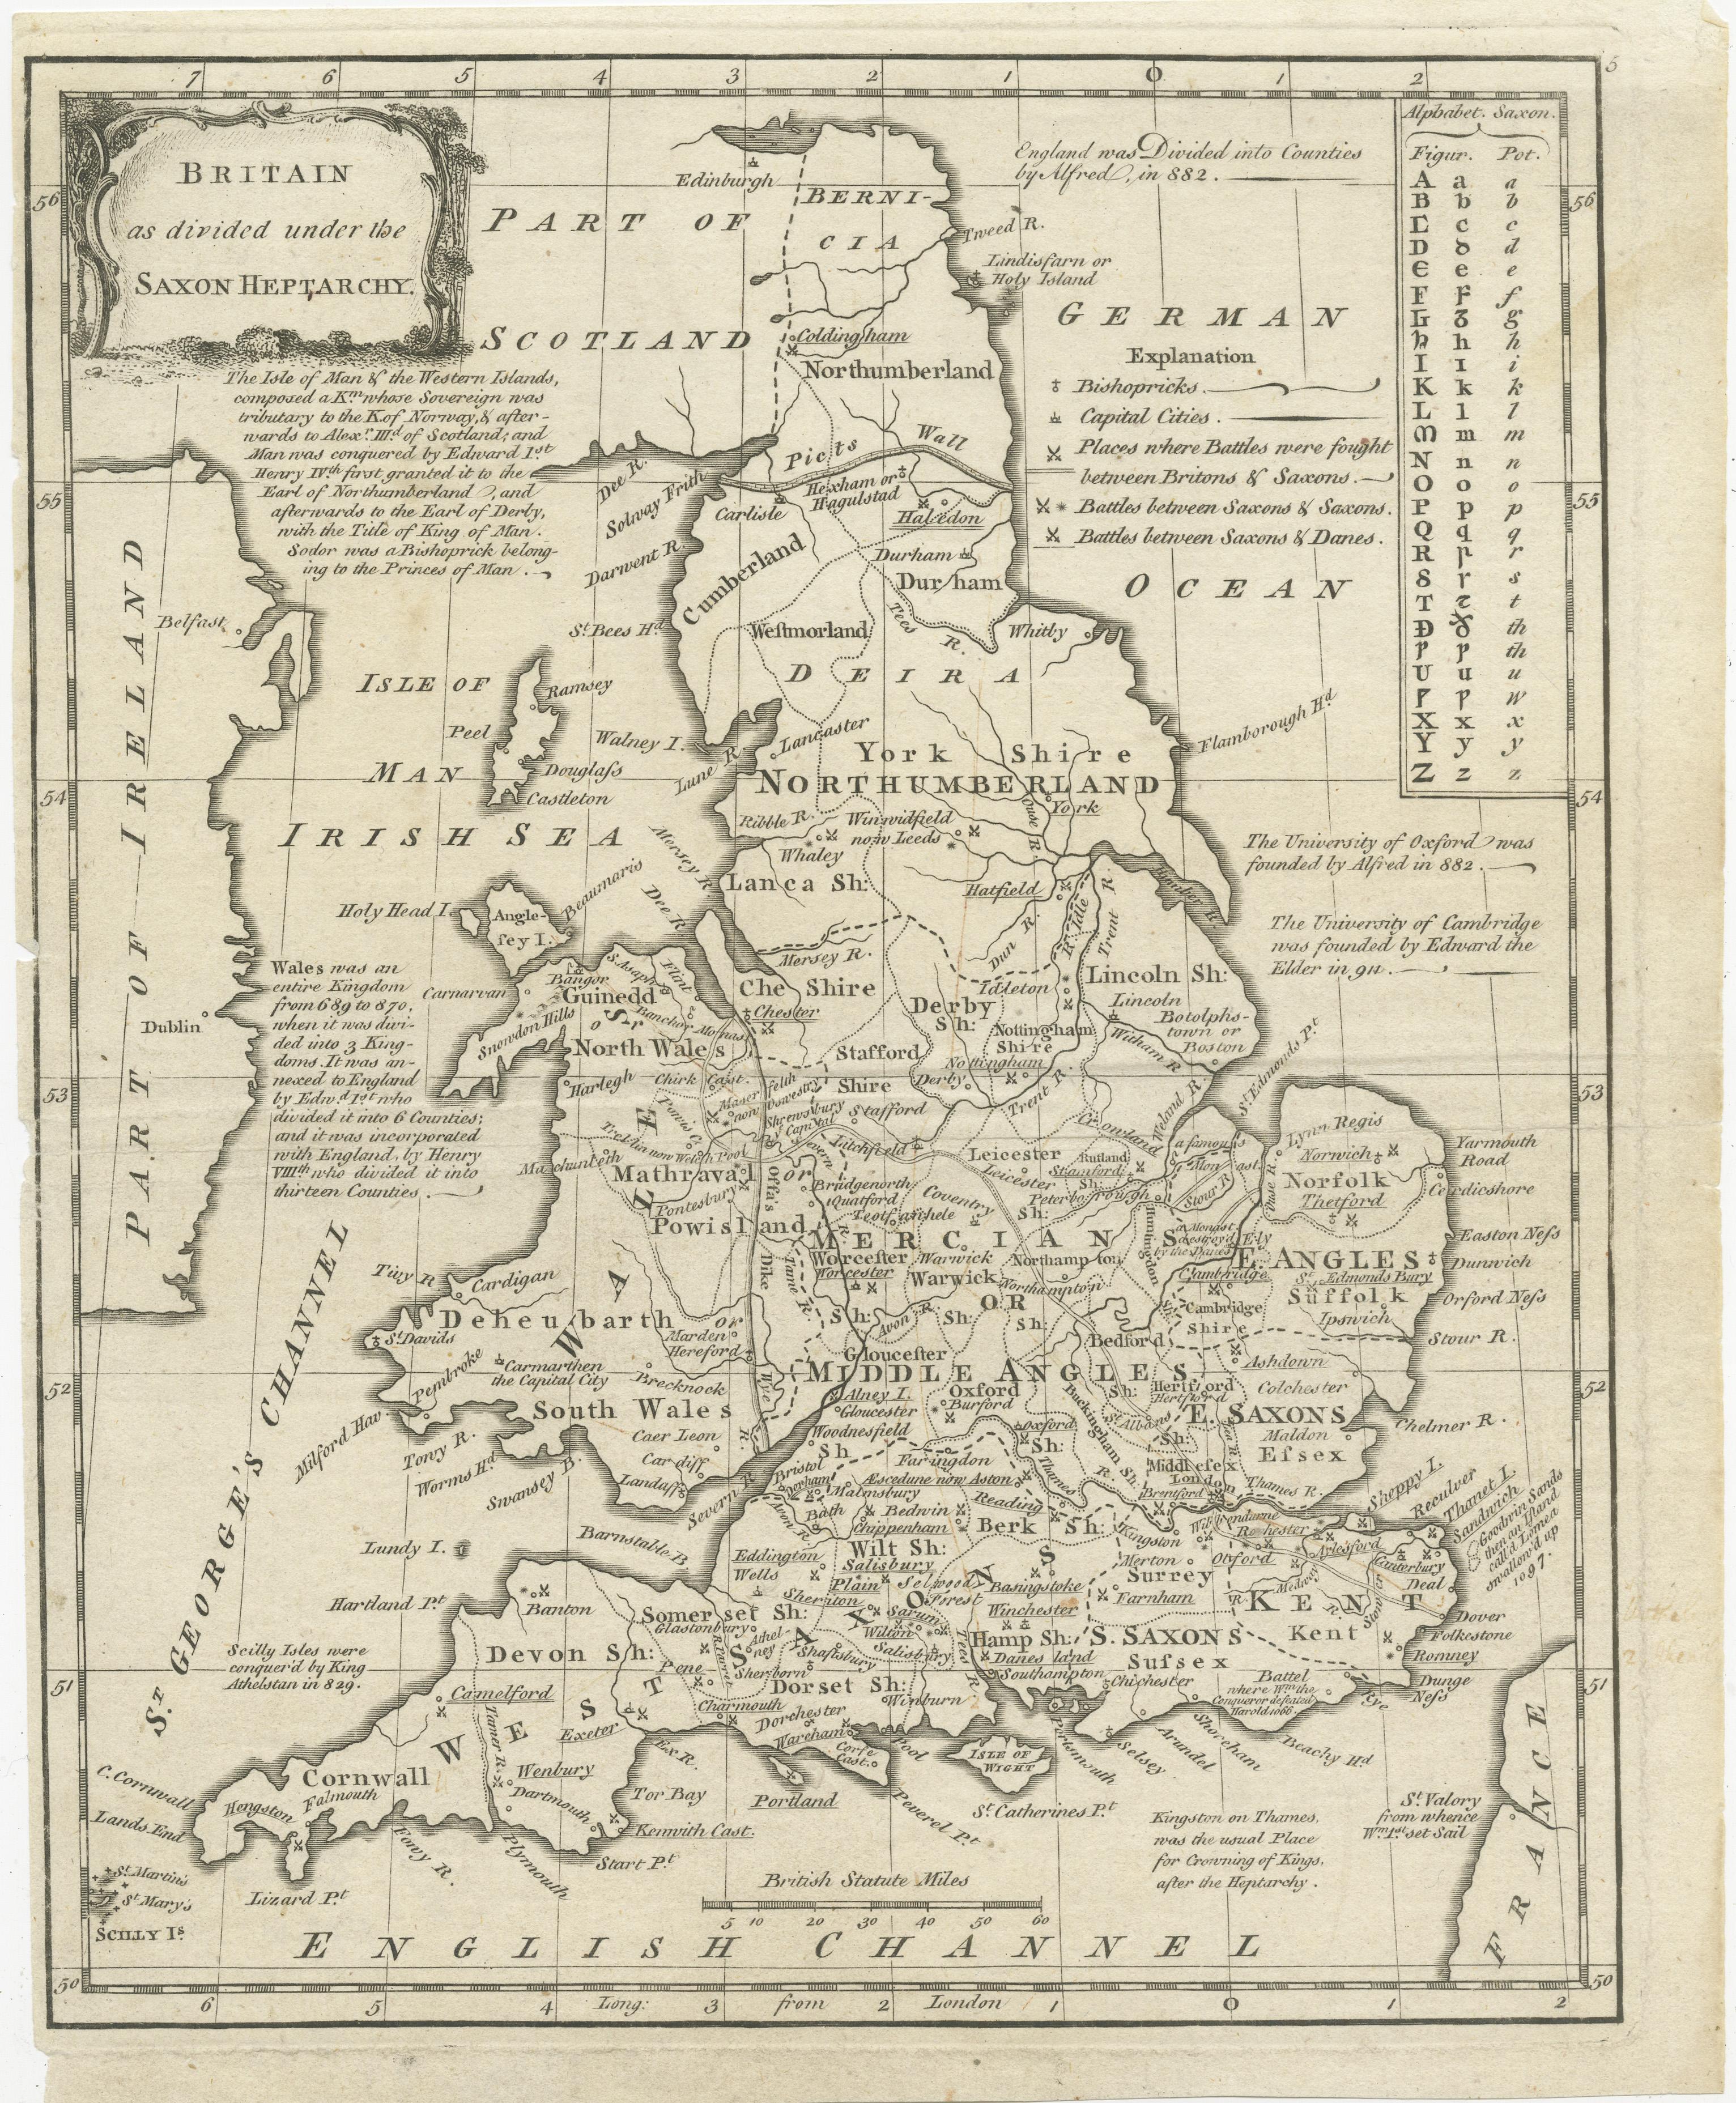 Antique map titled 'Britain as divided under the Saxon Heptarchy'. An antique copper engraving map of England and Wales by Joseph Ellis depicting the period of the Saxon Heptarchy. Embellished with a title cartouche and Panel displaying the Saxon